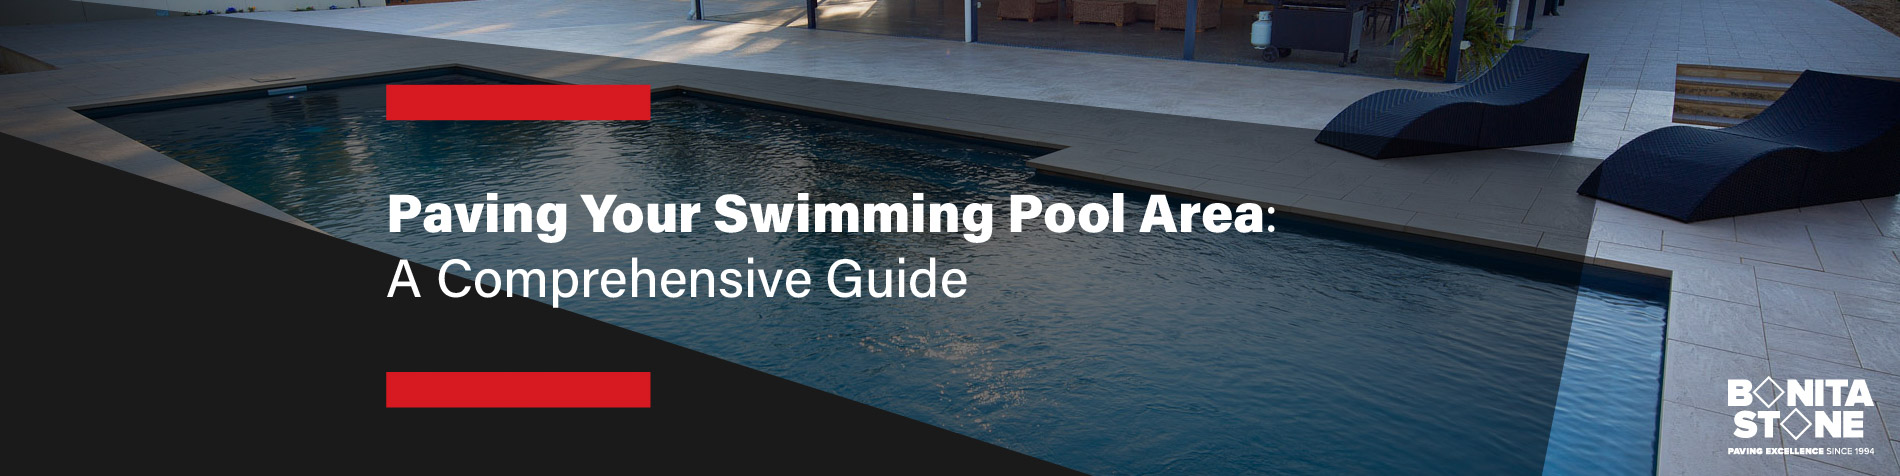 paving-your-swimming-pool-area-a-comprehensive-guide-banner